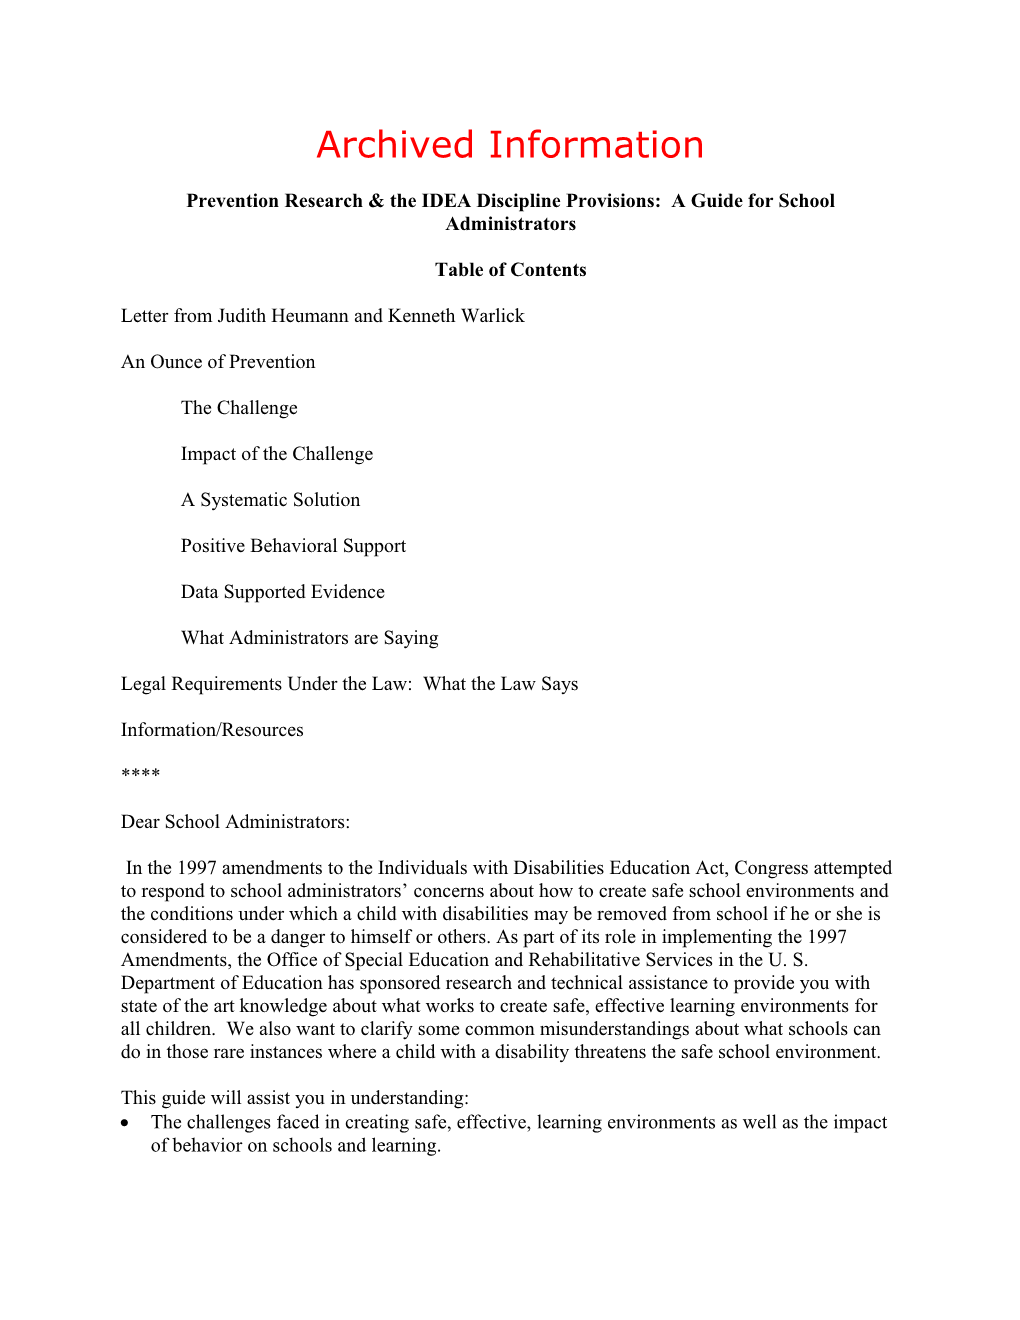 Archived: Prevention Research & the IDEA Discipline Provisions: a Guide for School